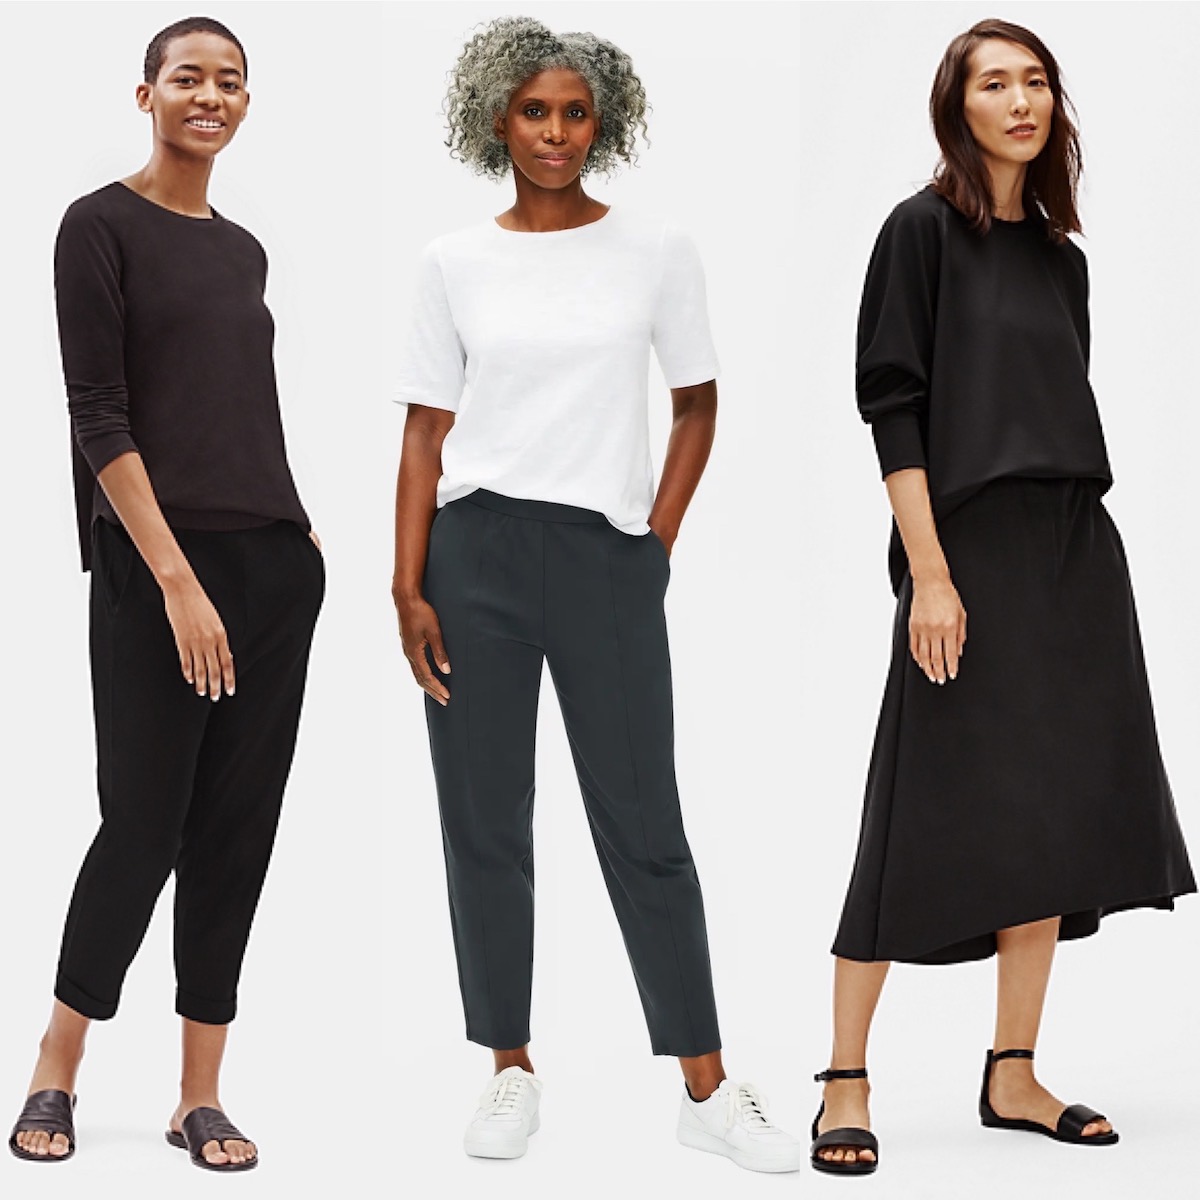 https://welcomeobjects.com/wp-content/uploads/2022/05/eileenfisher-tryon-collage.jpg